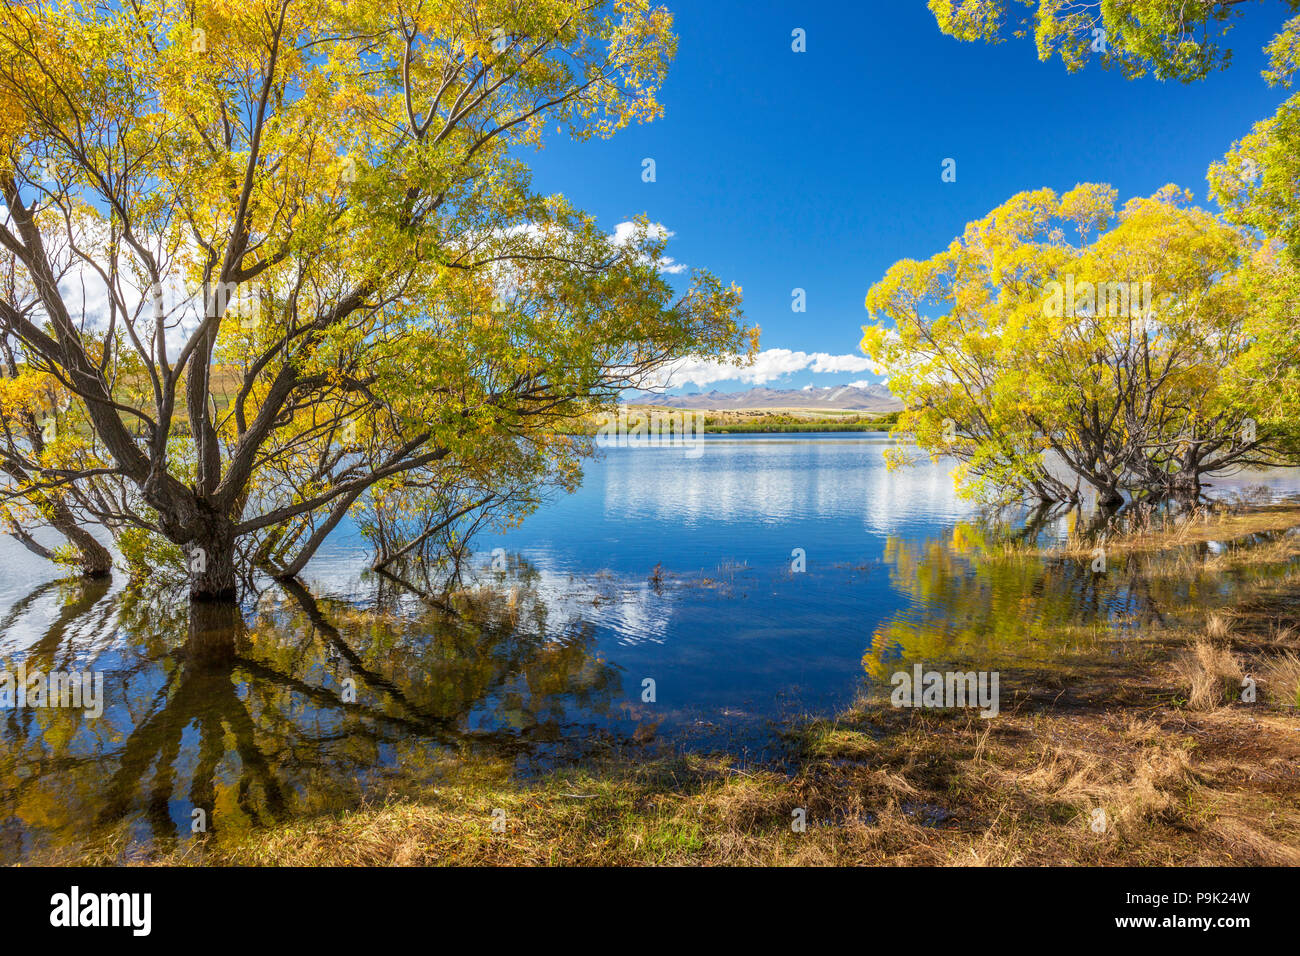 New Zealand Landscape of Lake Mcgregor a high country, willow-lined lake in the Mackenzie Basin near Tekapo township South Island New Zealand Stock Photo